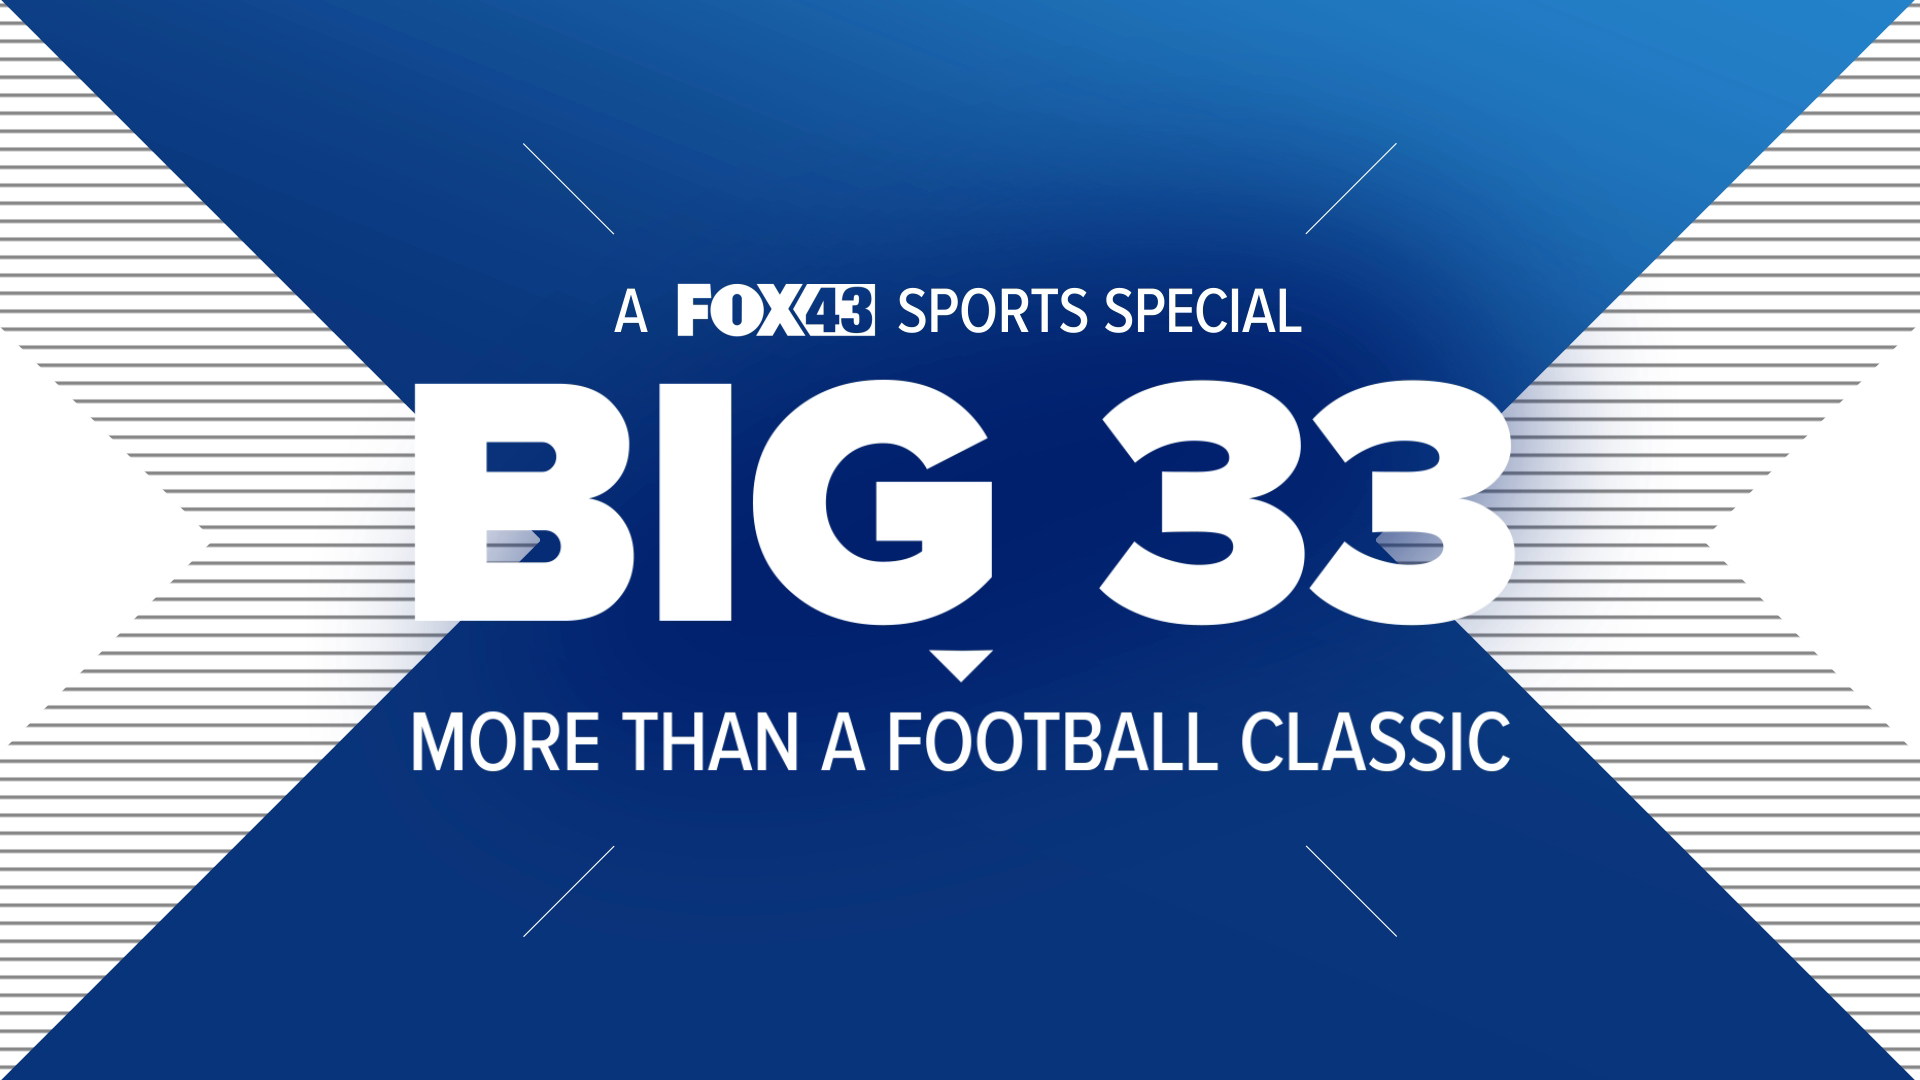 This special dives into the Big 33 Classic game, highlighting the players and coaches behind the event.